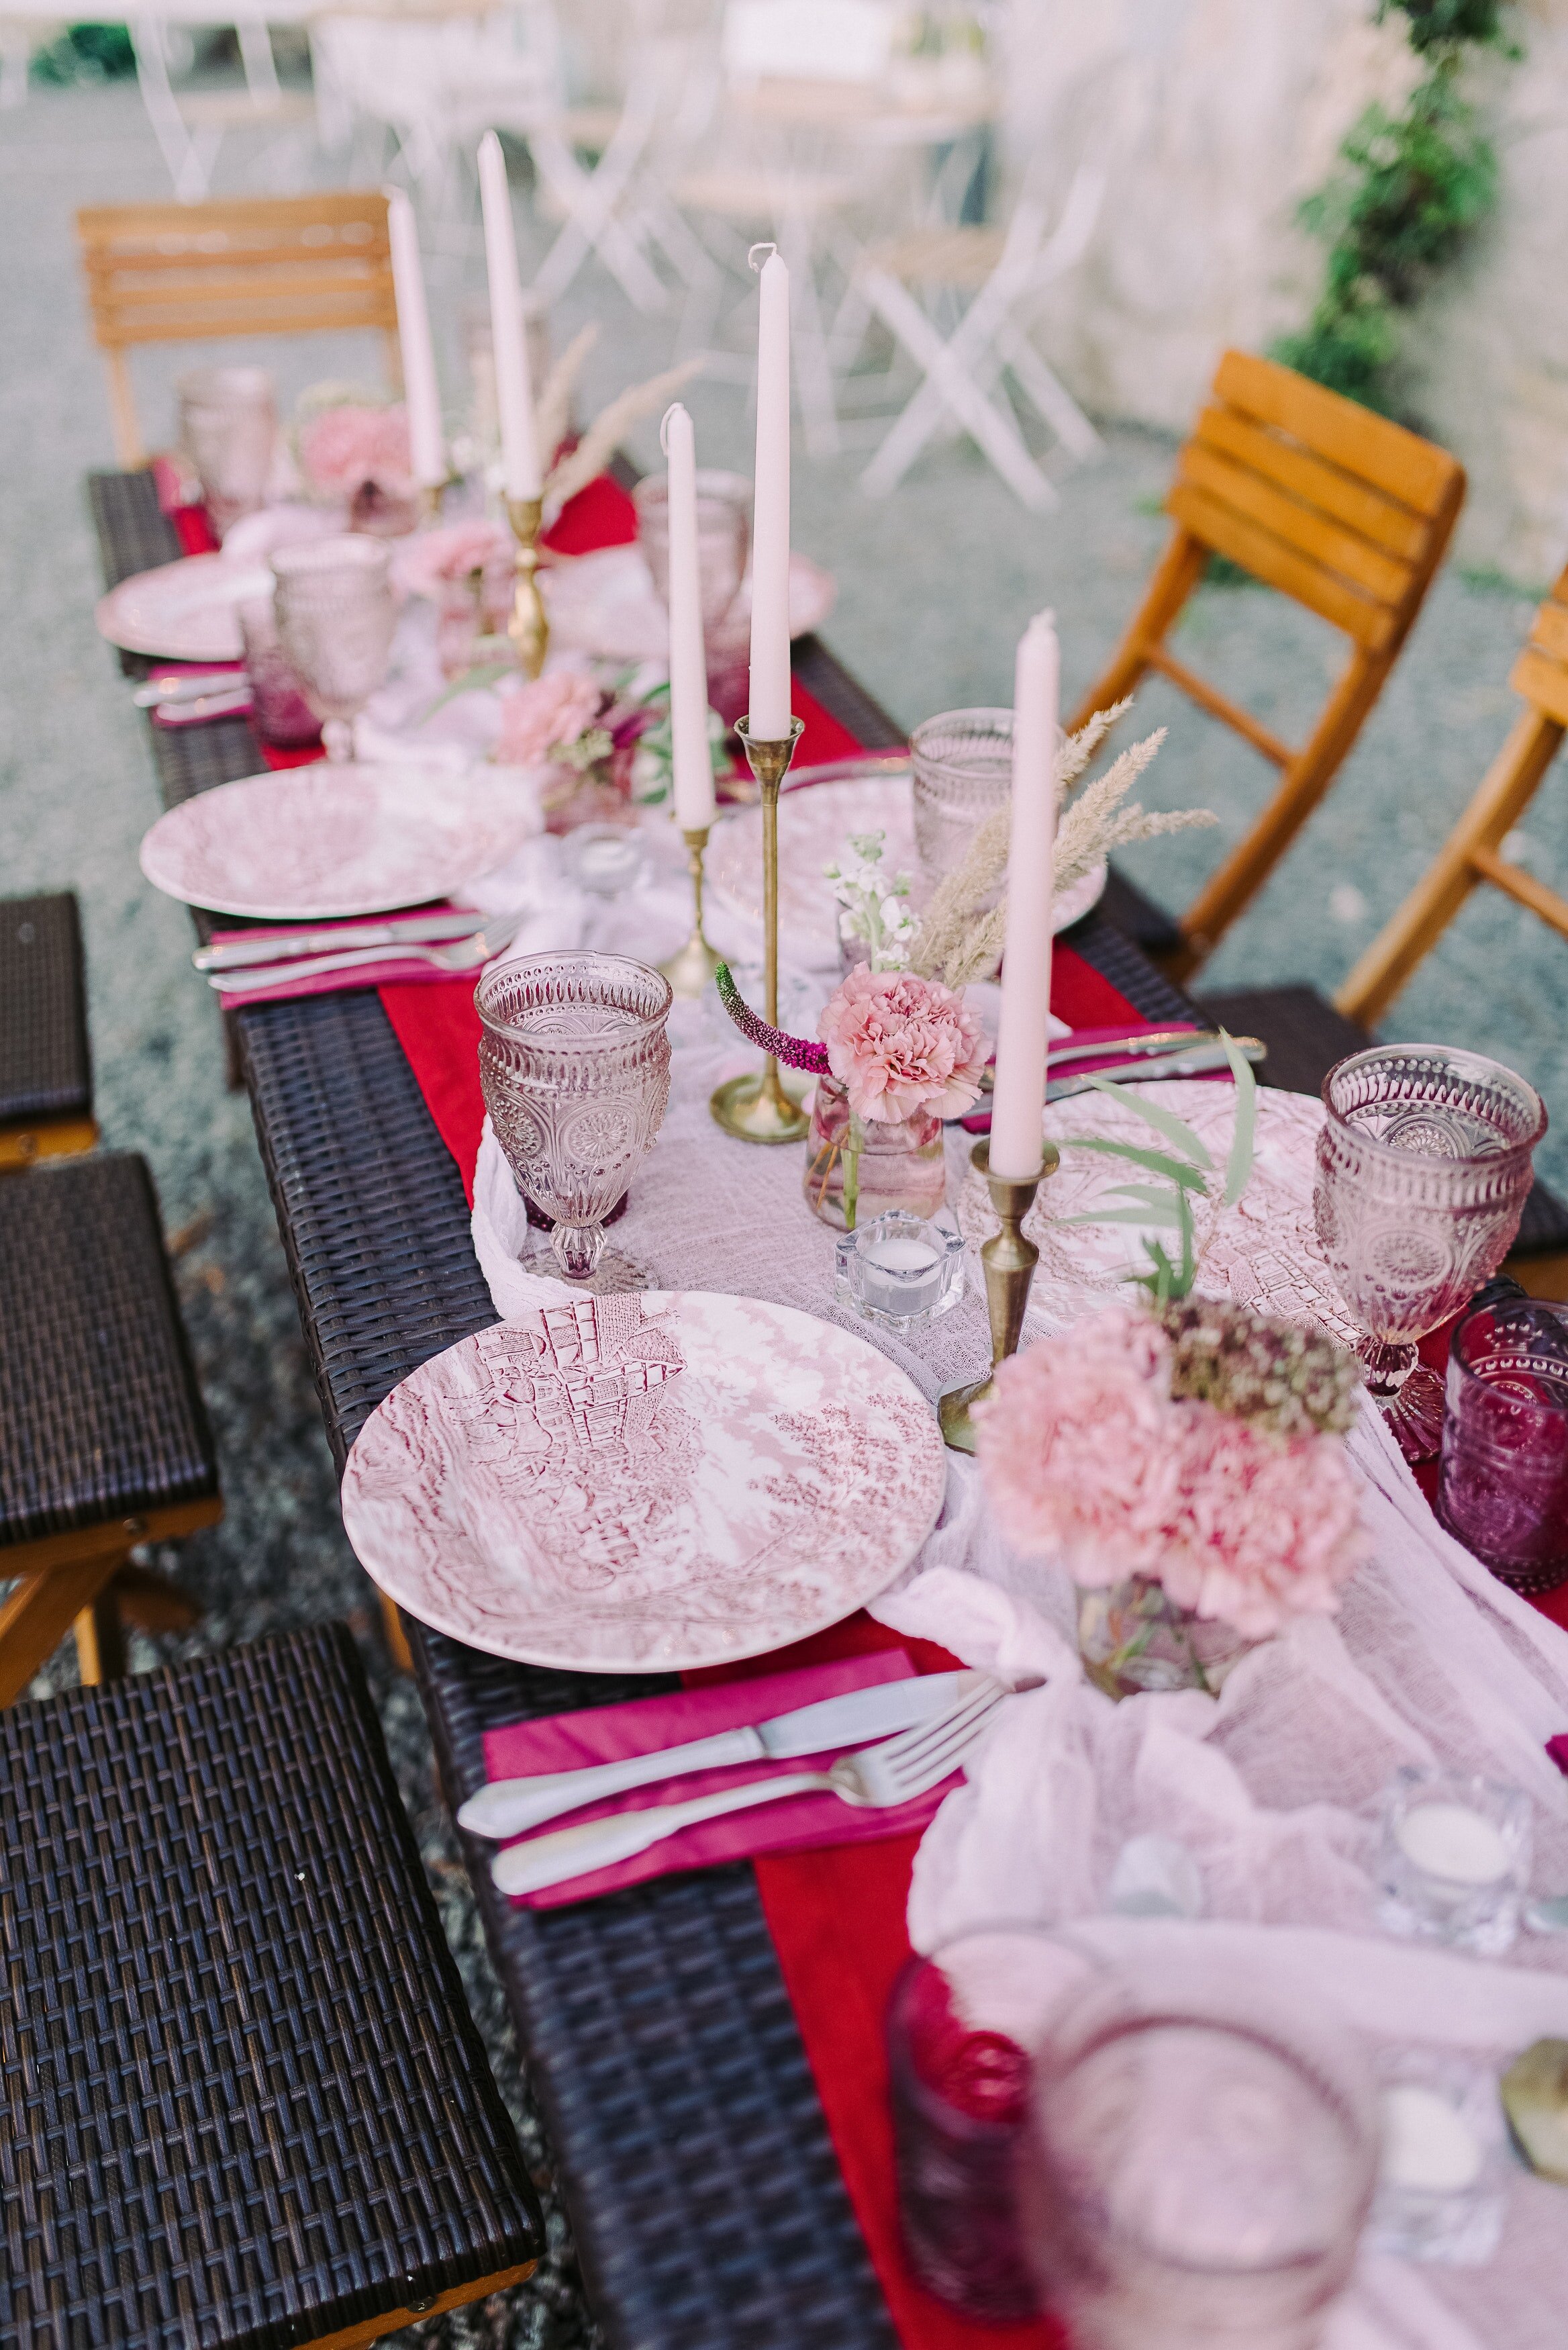 7 easy ways to plan sustainable wedding food_Red Wedding Table Settings